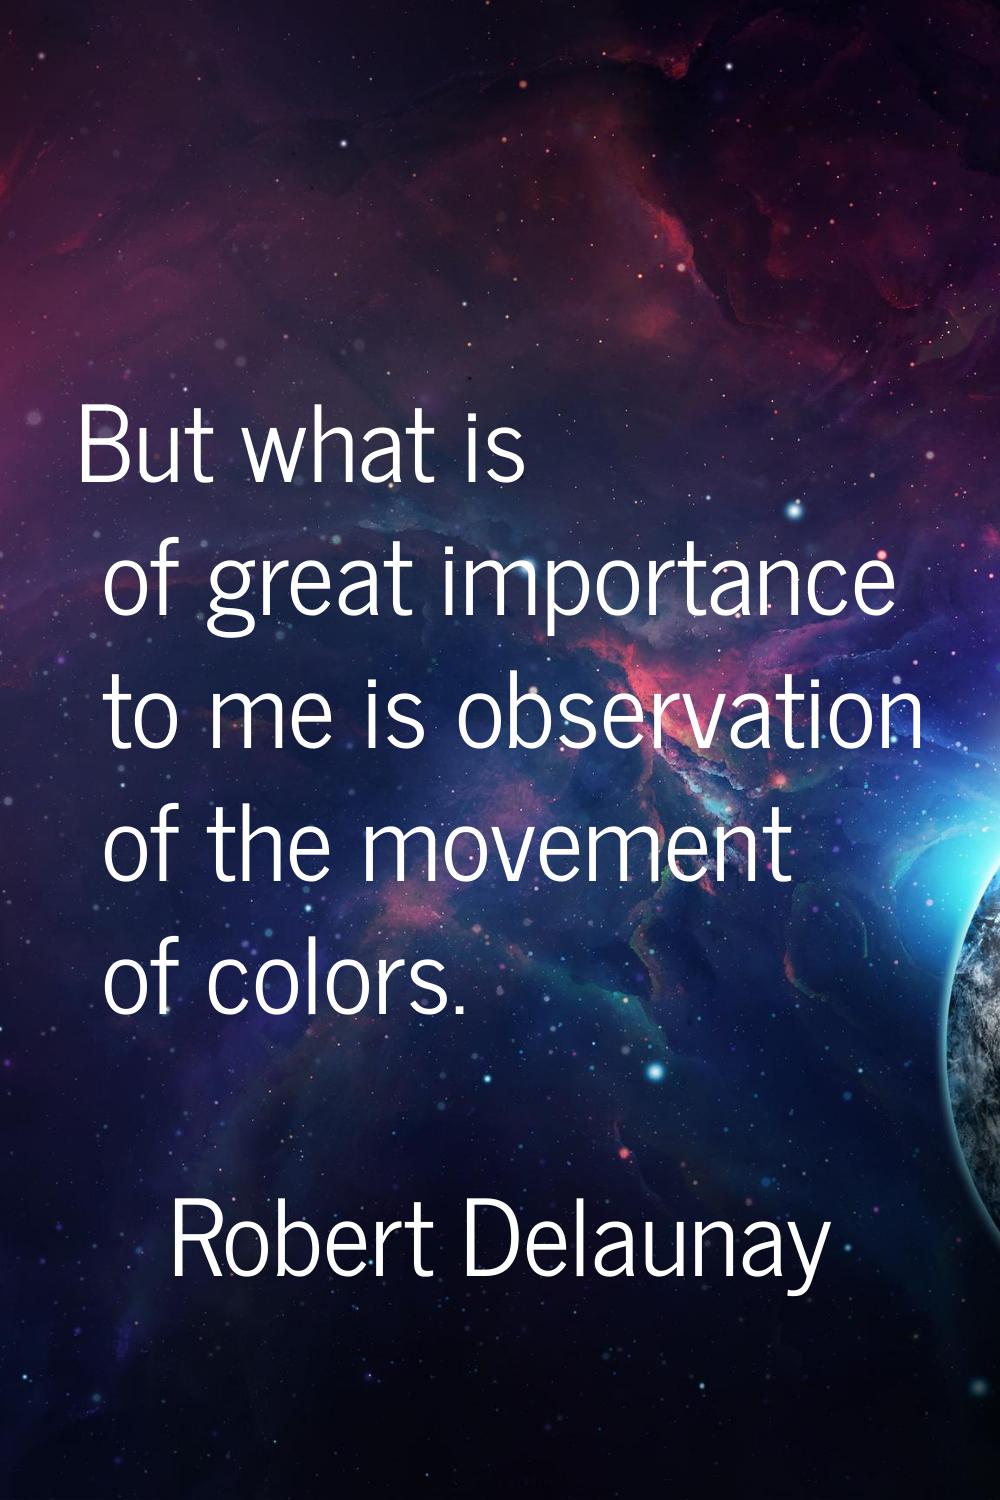 But what is of great importance to me is observation of the movement of colors.